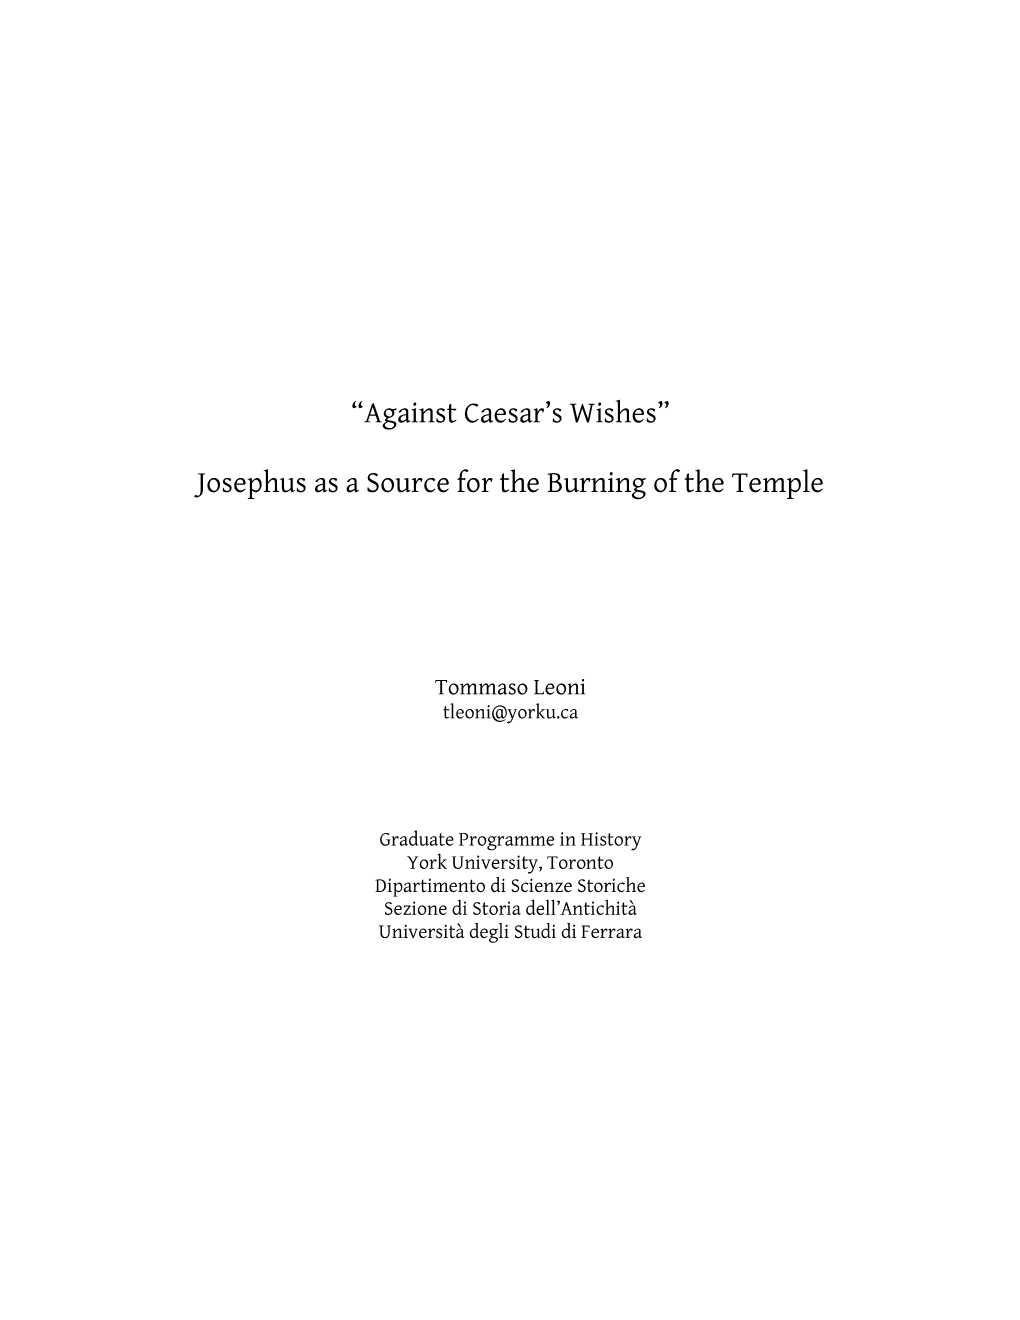 “Against Caesar's Wishes” Josephus As a Source for the Burning of the Temple